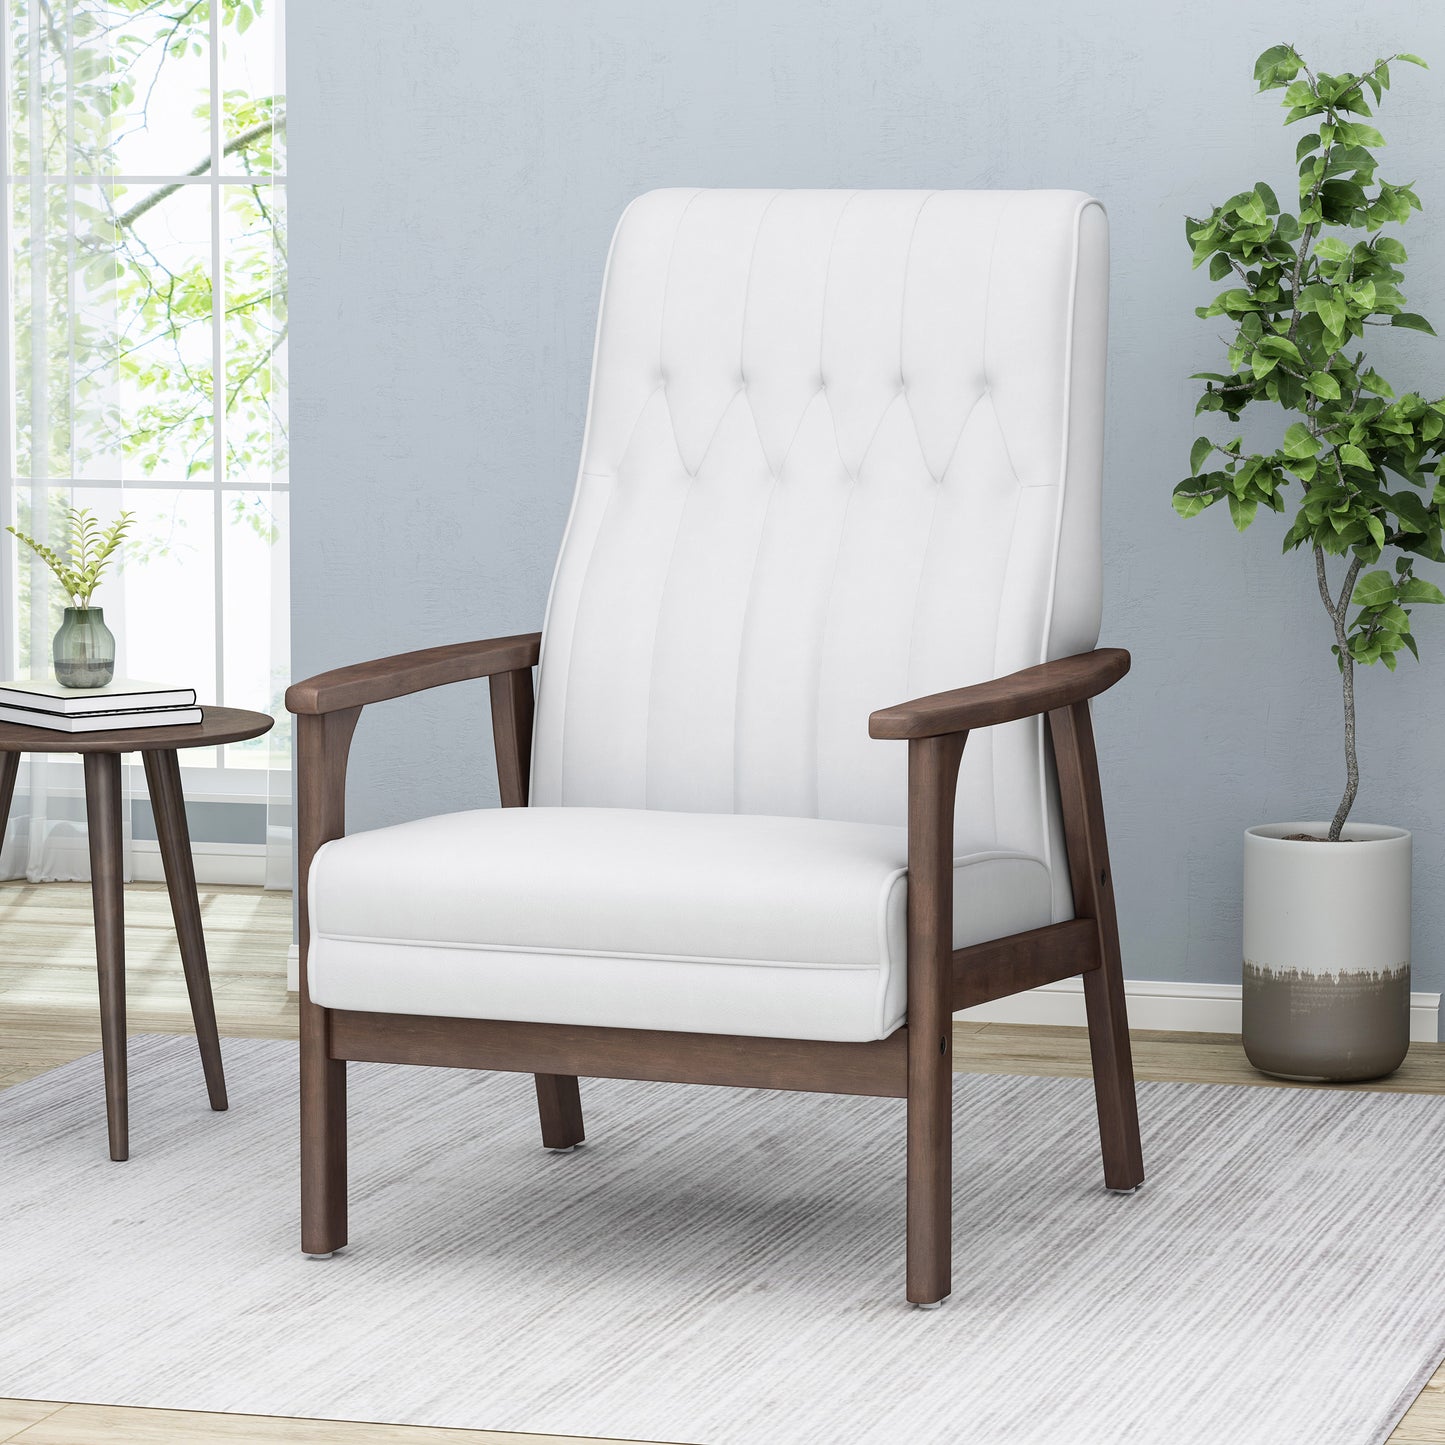 Katharine Mid-Century Faux Leather Modern Accent Chair